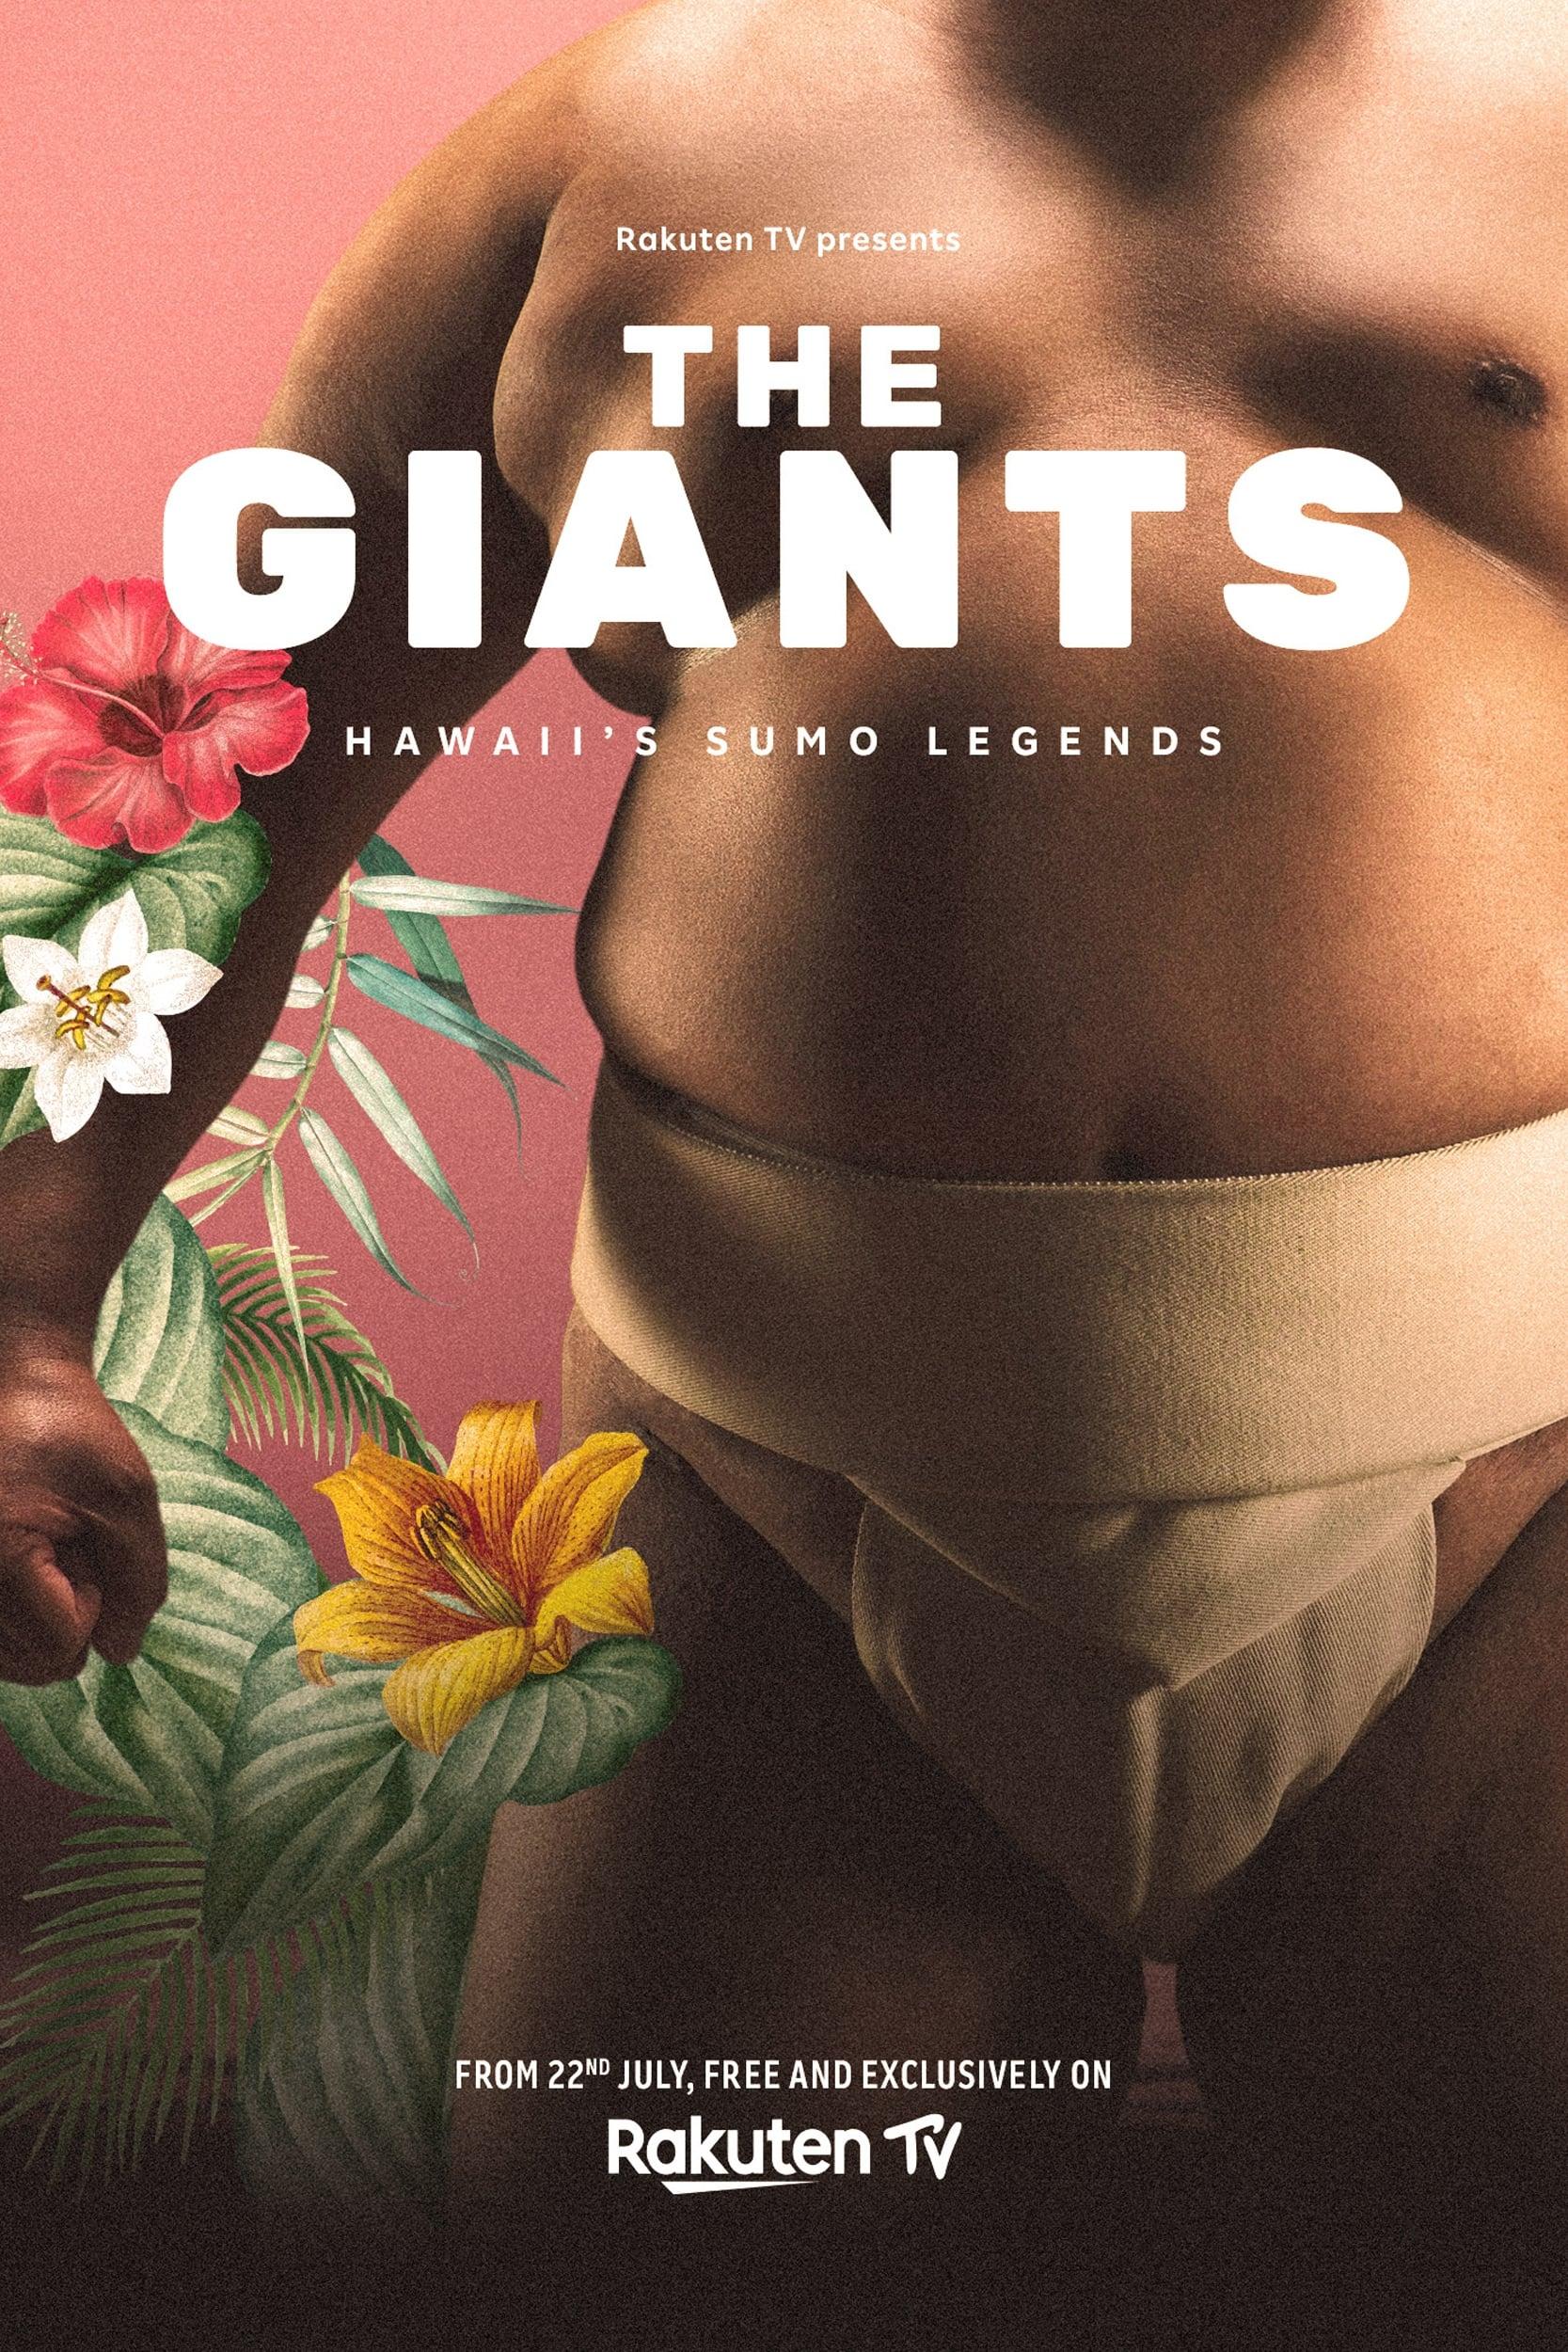 The Giants poster